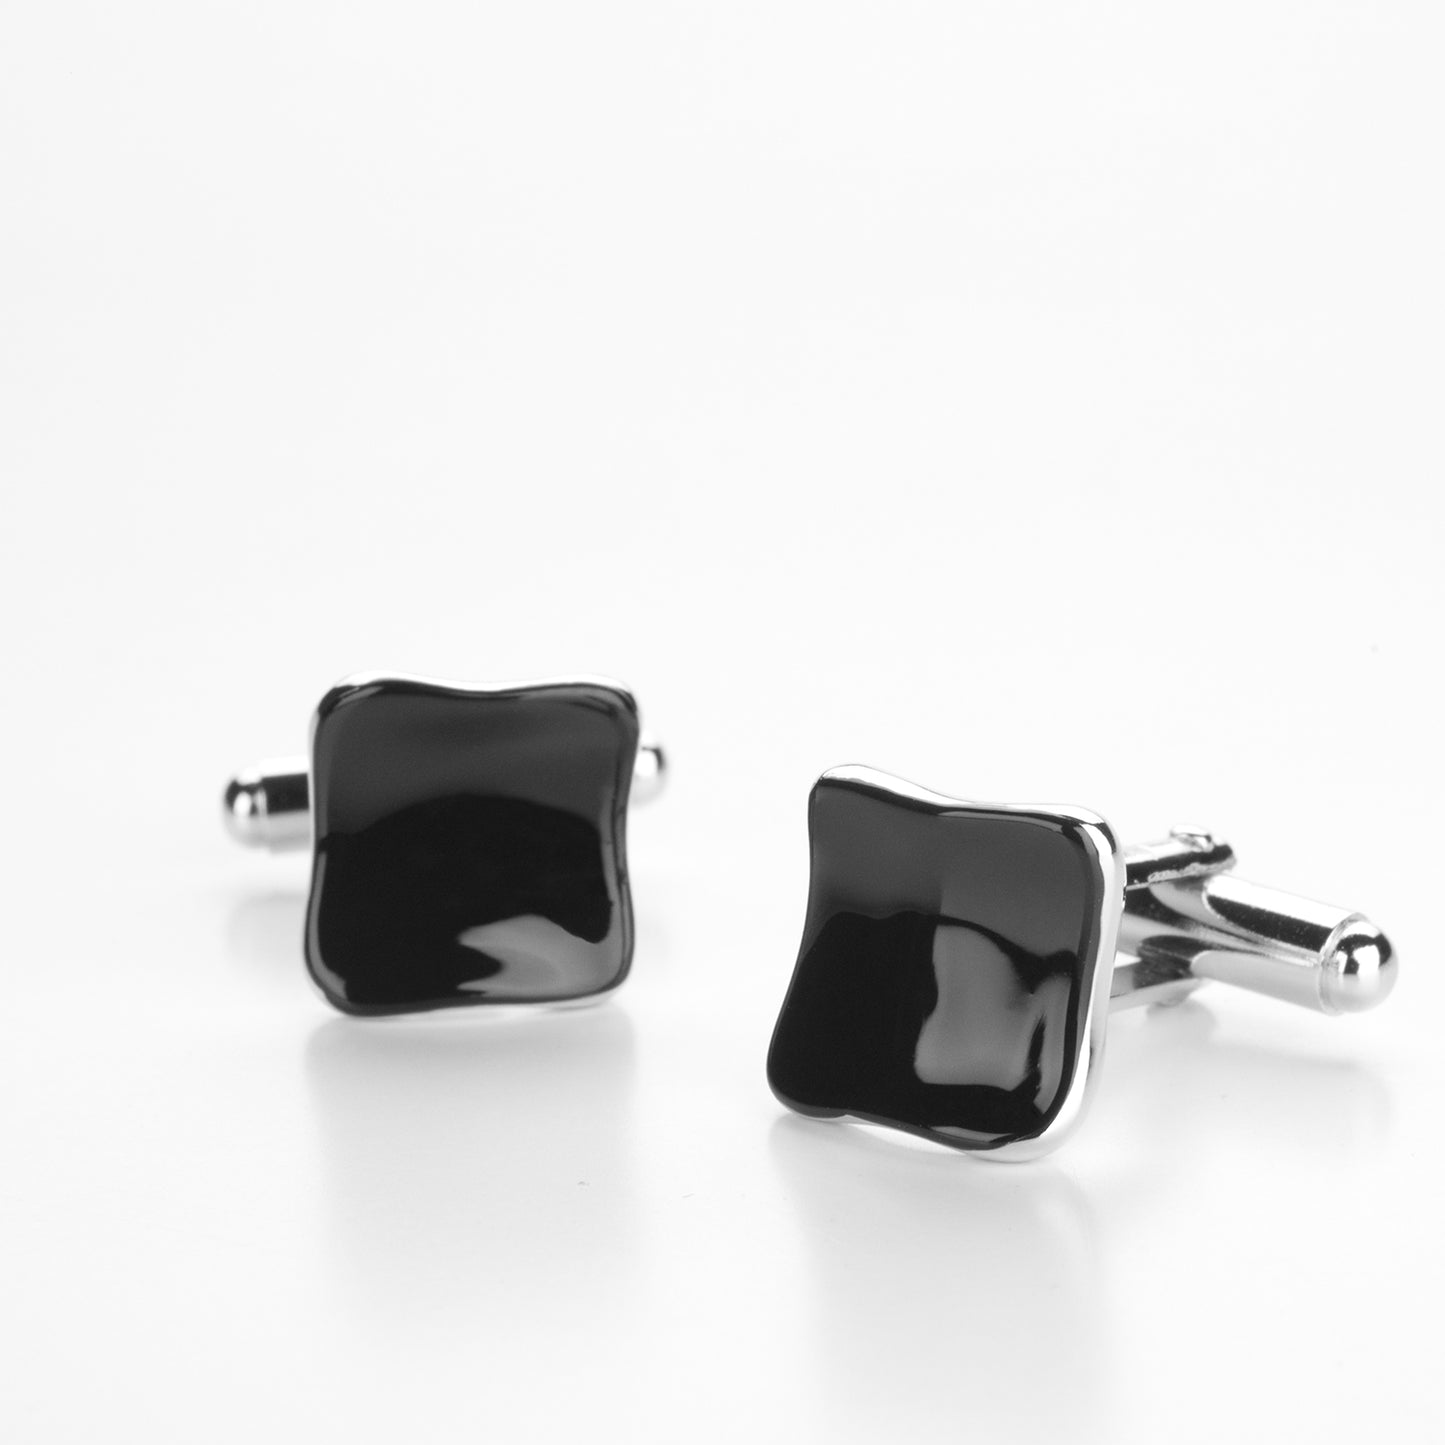 Square cufflinks in silver and black enamel